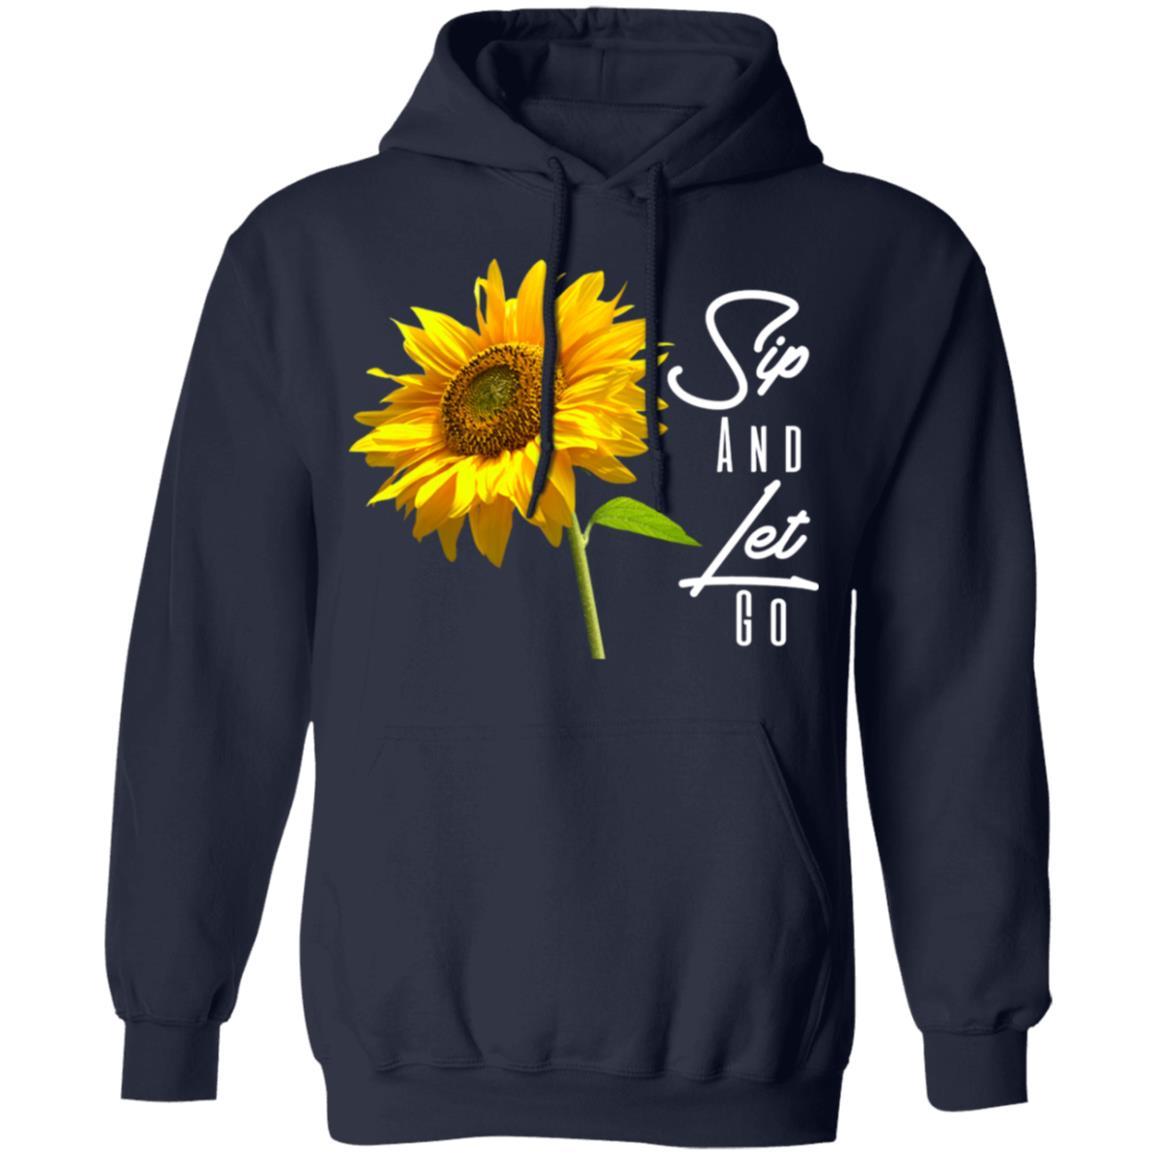 Sip And Let Go Pullover Hoodie - Navy Blue - Loyalty Vibes